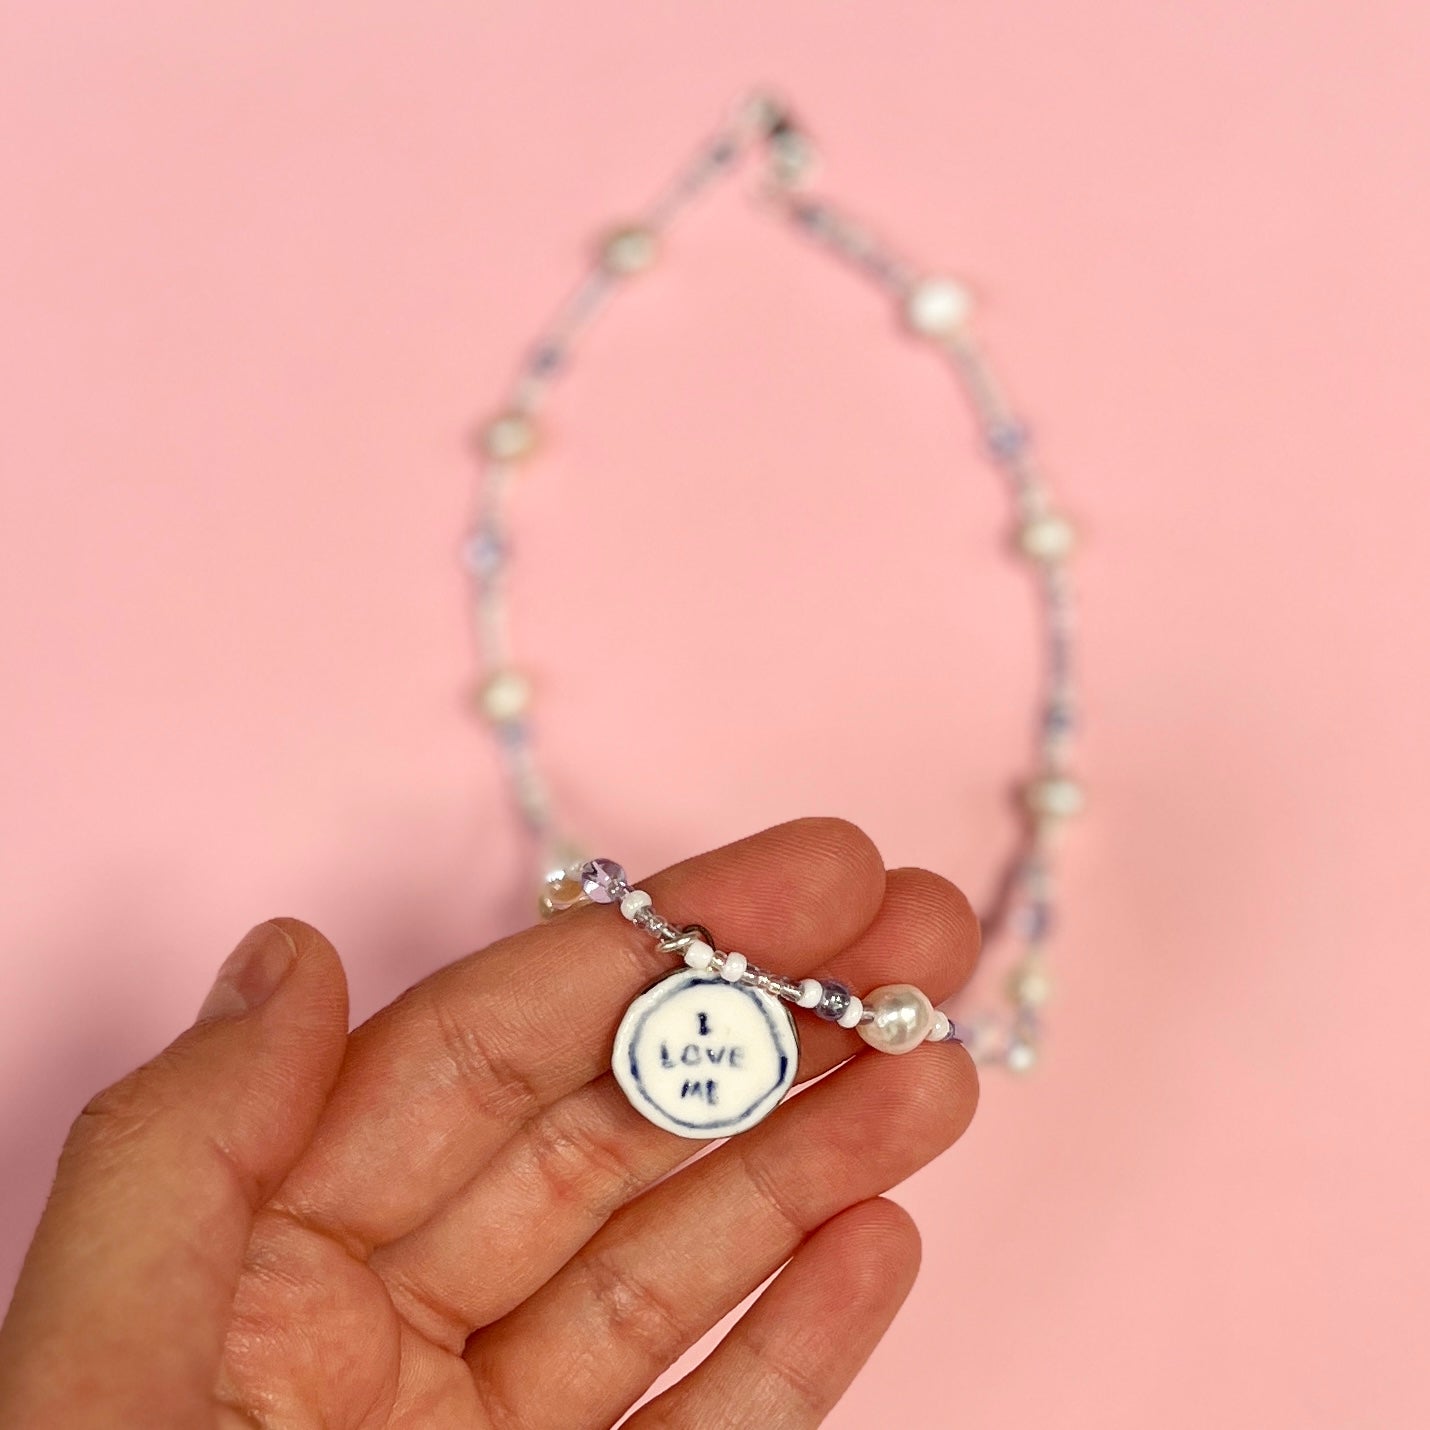 "I Love Me" Cloud Coin Necklace